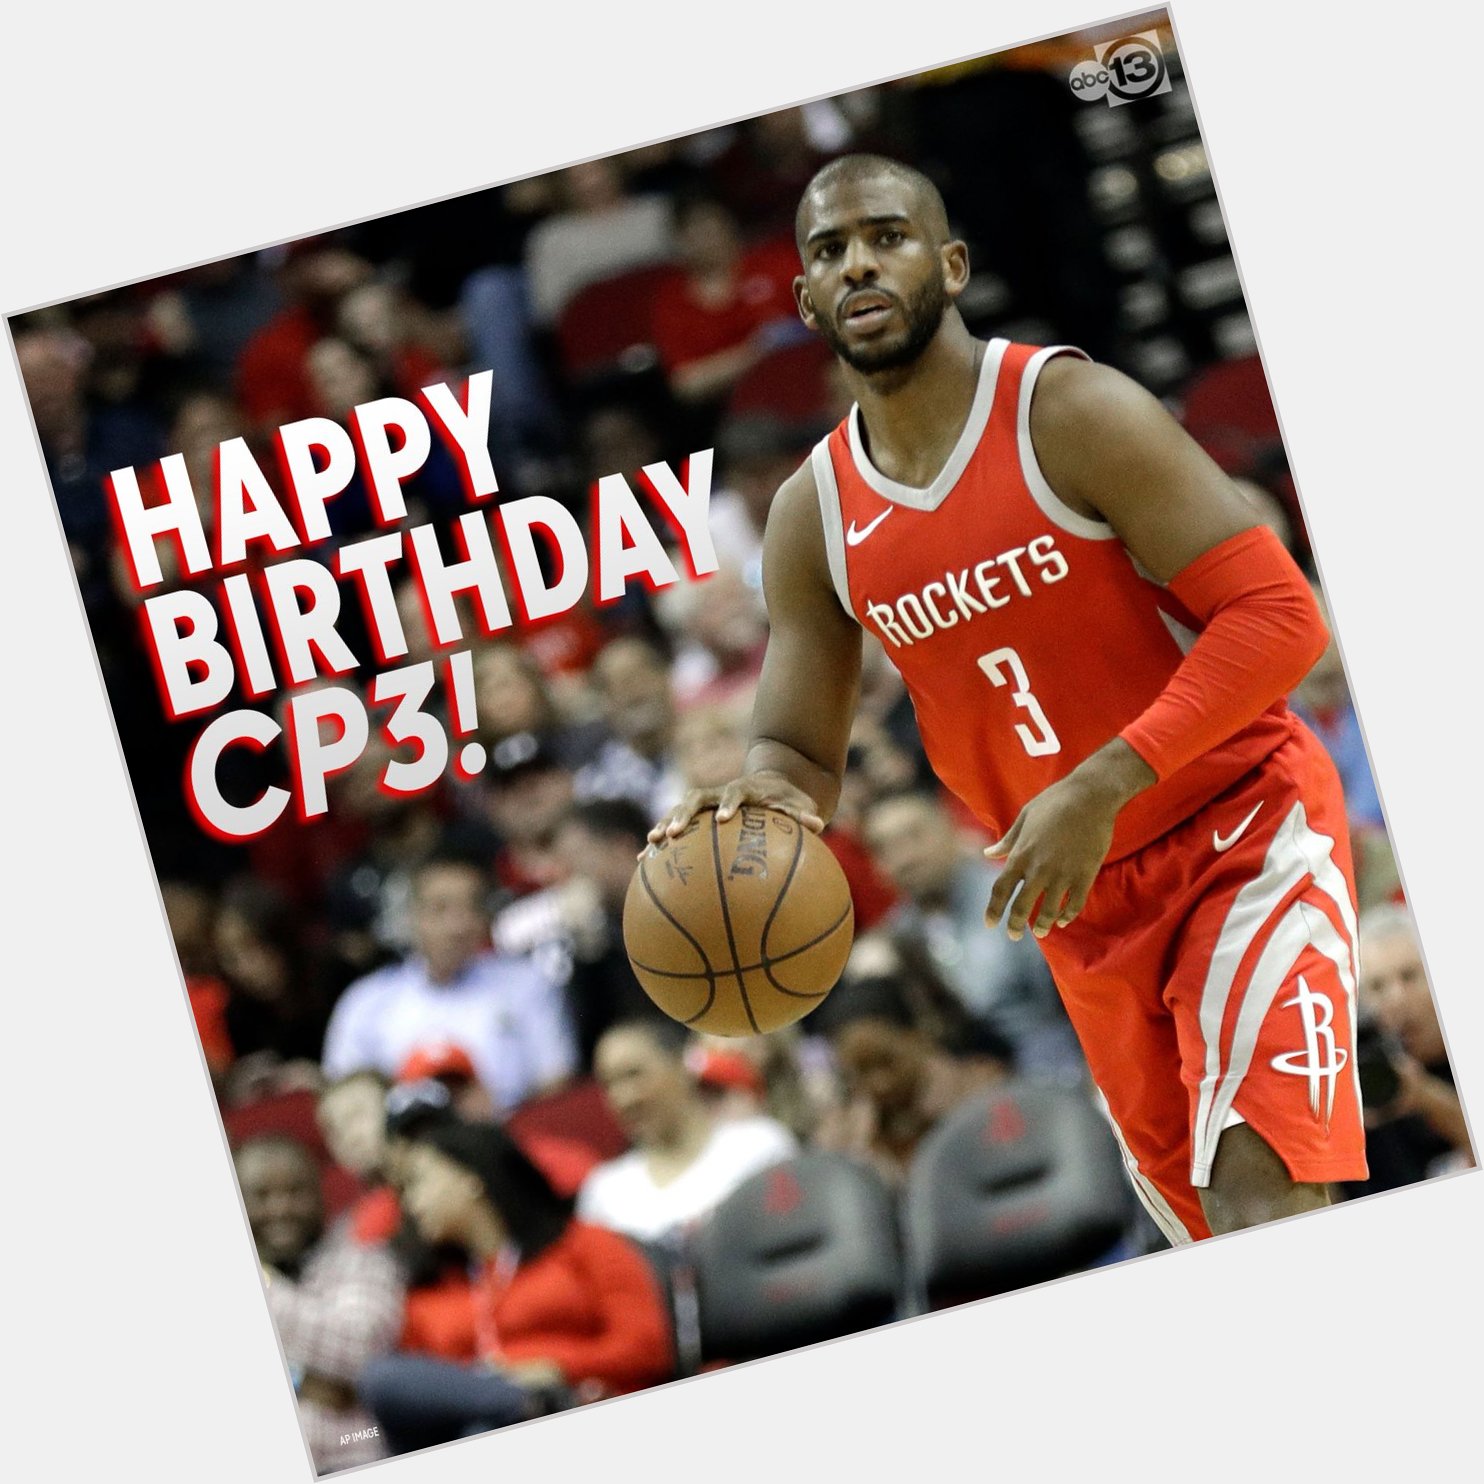 Wishing a HAPPY BIRTHDAY!  Let\s get a win tonight for him!  